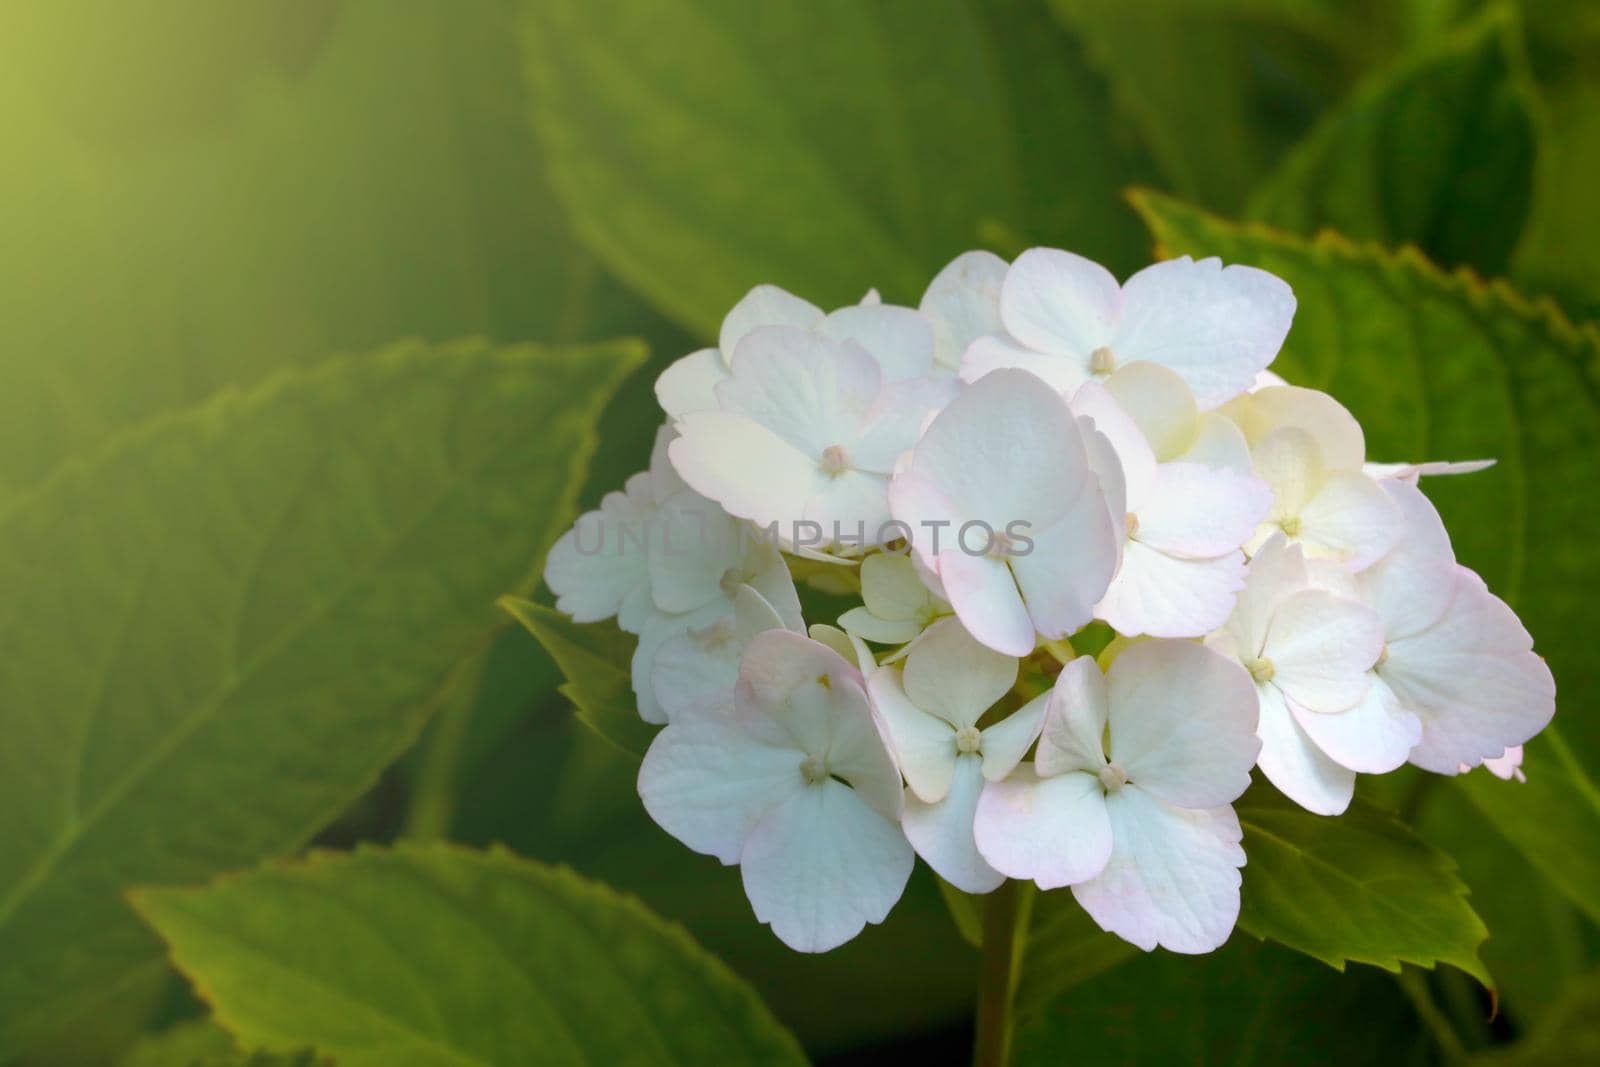 Close-up of a white blooming hydrangea in the park